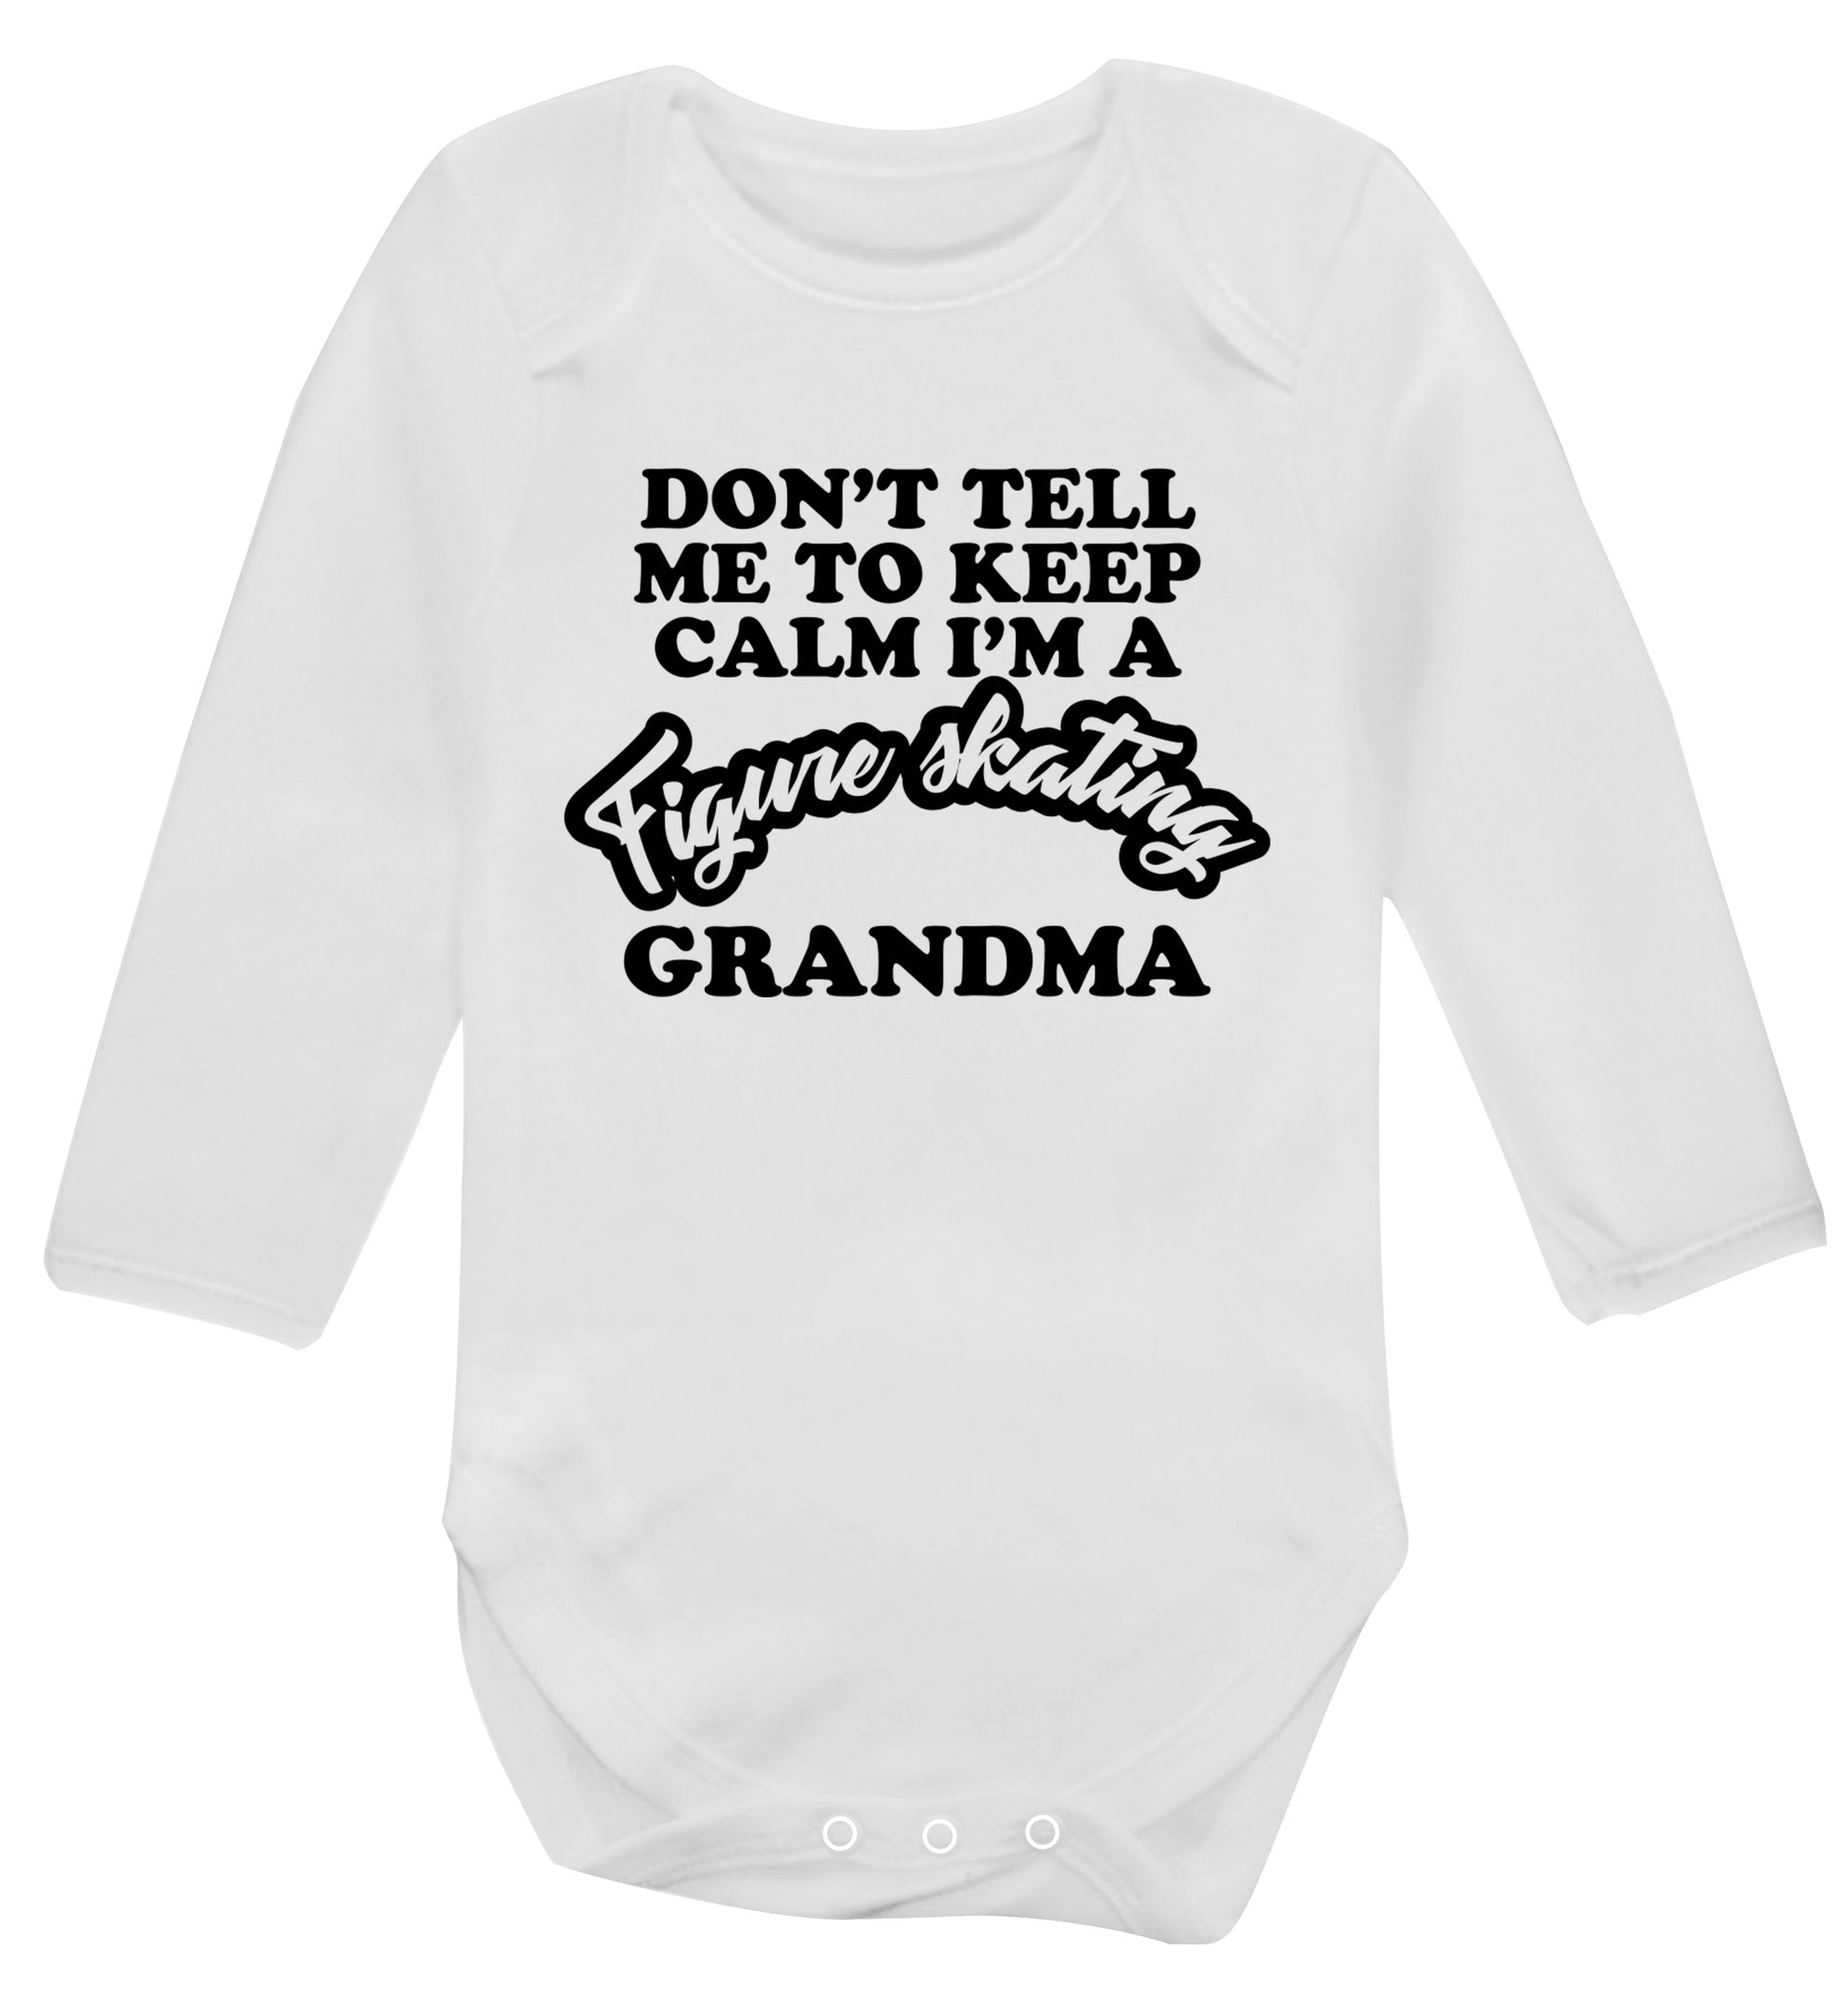 Don't tell me to keep calm I'm a figure skating grandma Baby Vest long sleeved white 6-12 months